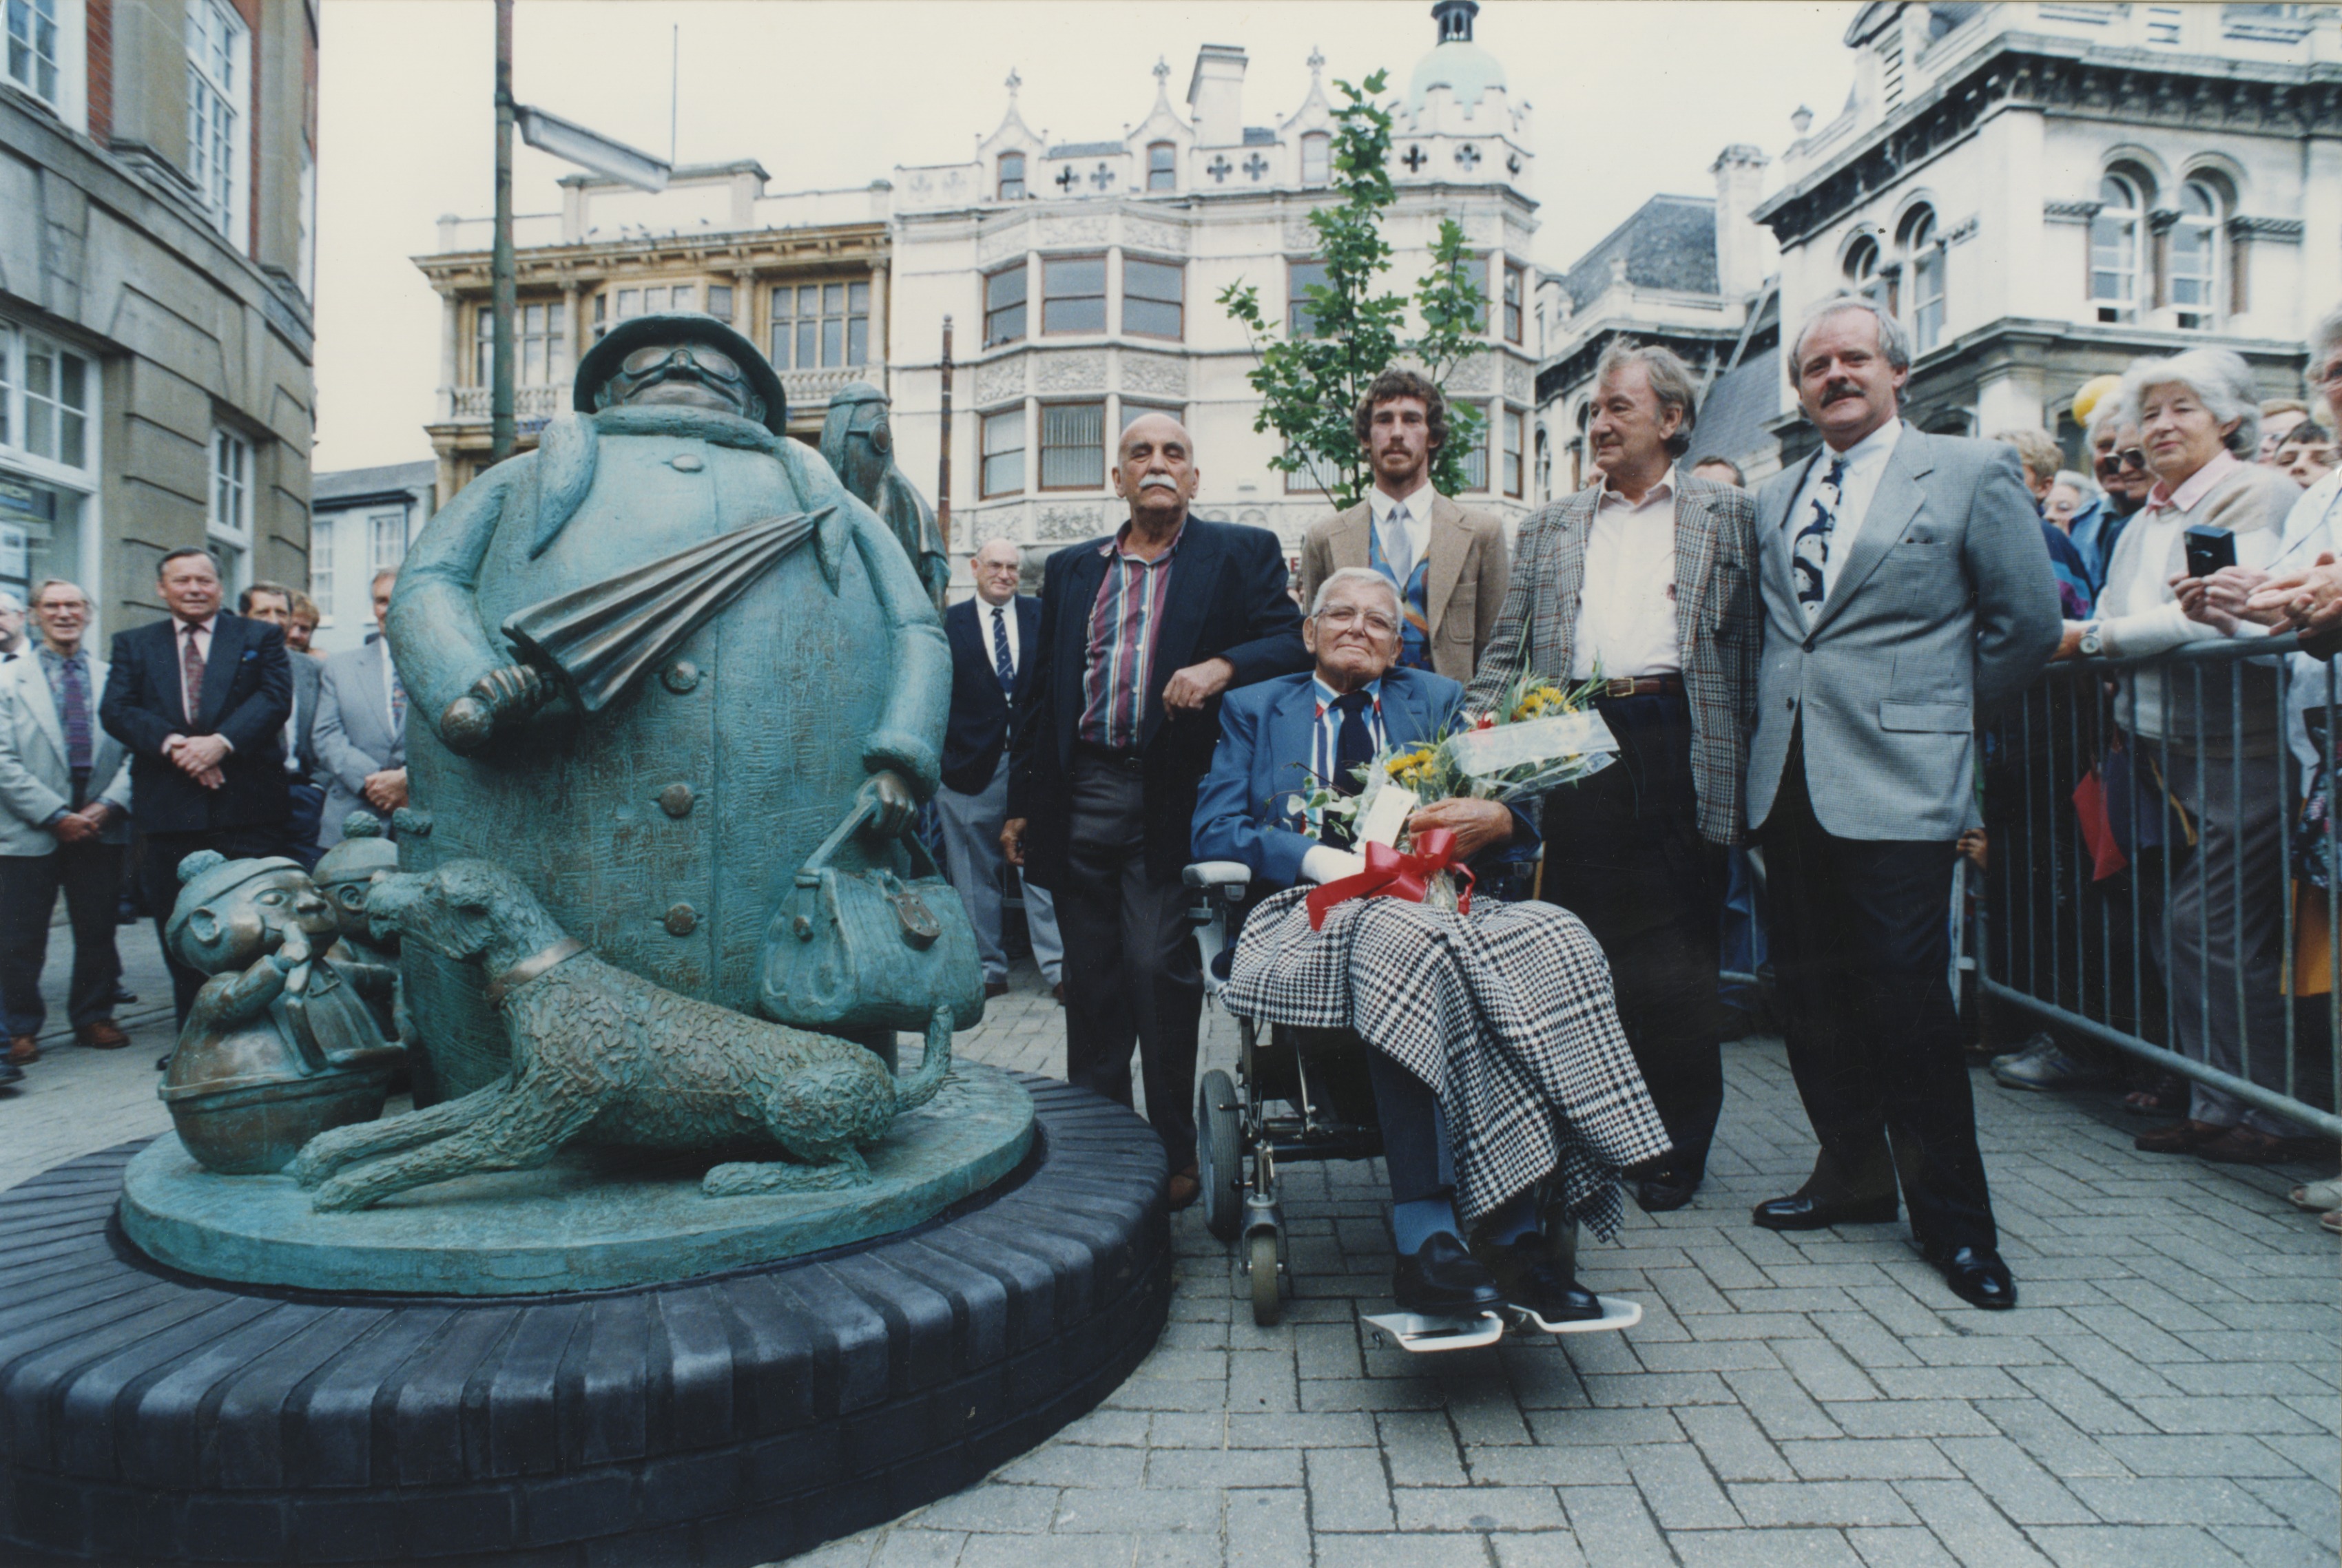 Colour photo of the unveiling of the Grandma statue in Ipswich, featuring actor Warren Mitchell , Giles, the sculptor Miles Robinson, writer and friend Johnny Speight, and Andrew Cameron (Express Newspapers) - September 1993 (Image ref: GAPH00430)